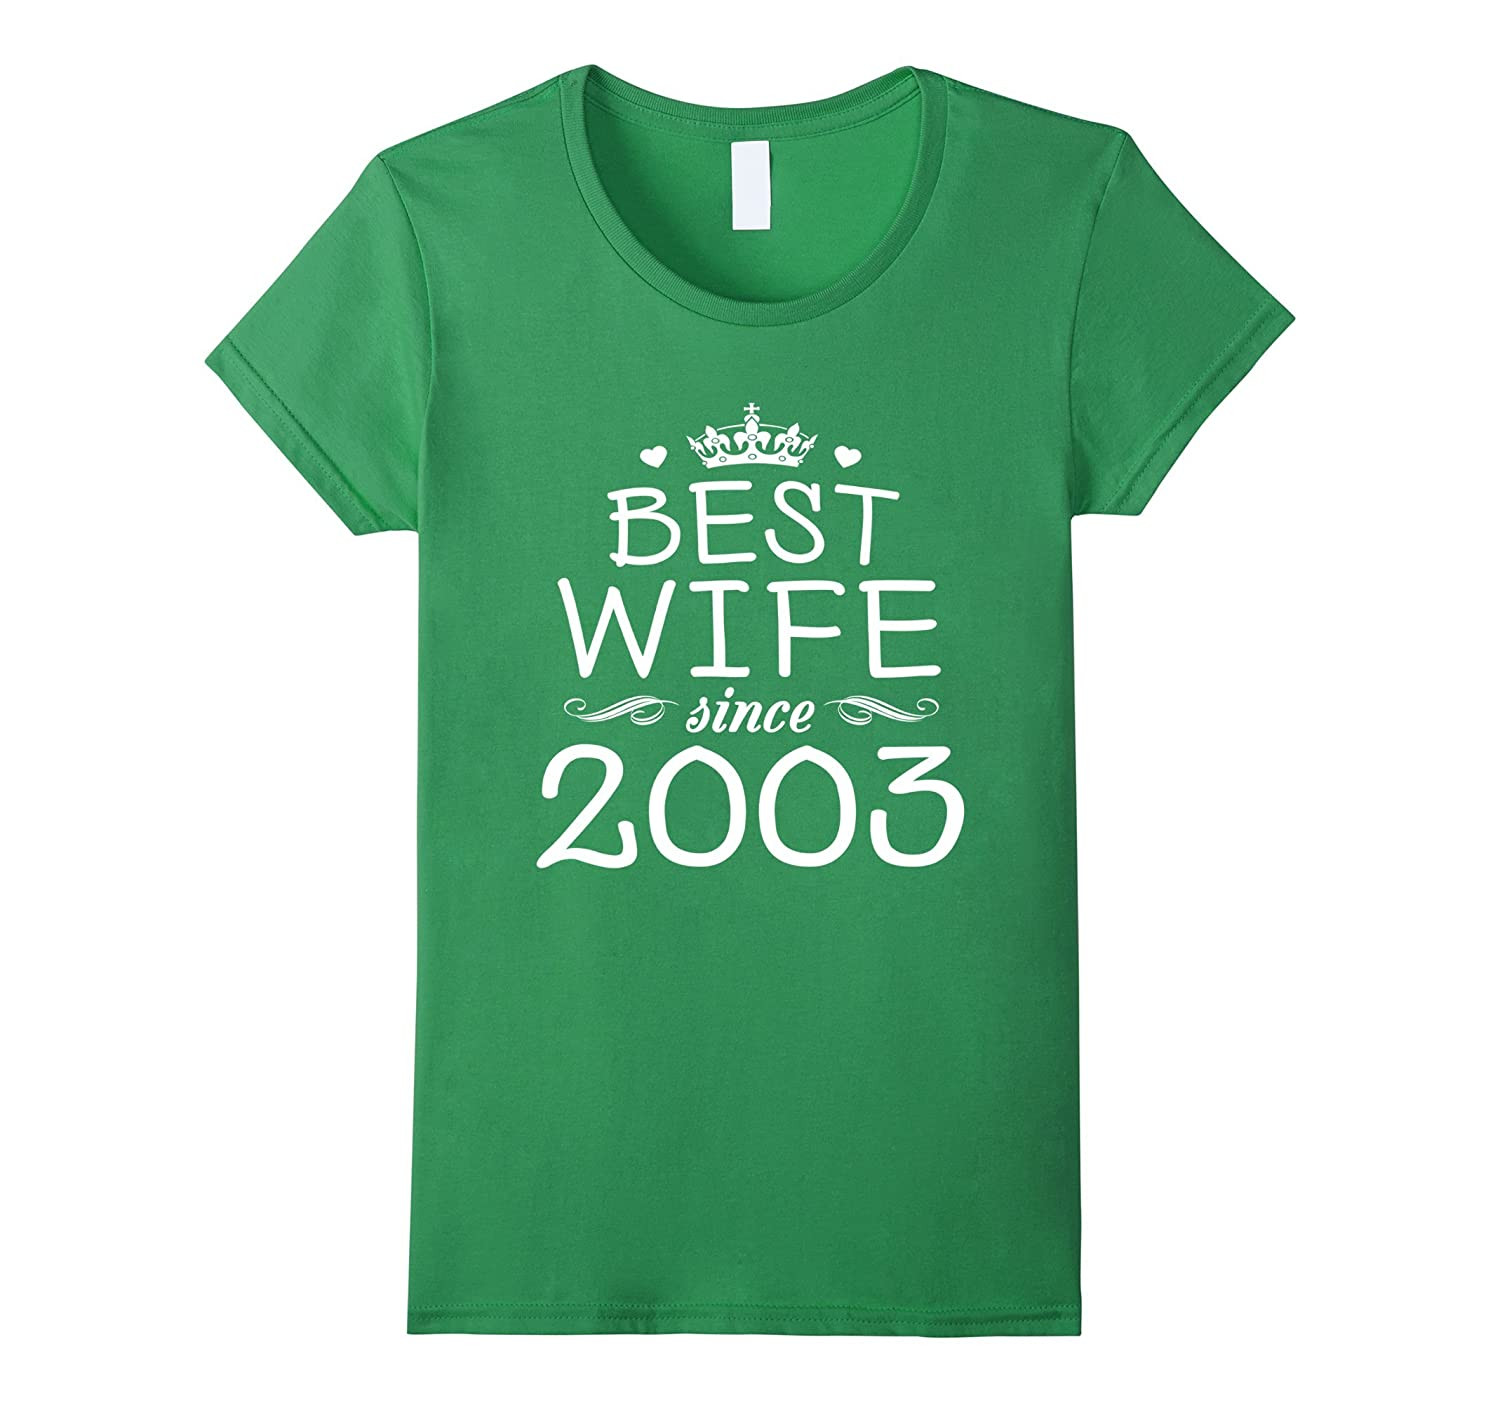 14Th Wedding Anniversary Gift Ideas For Her
 14th Wedding Anniversary Gift Ideas For Her Wife Since 2003